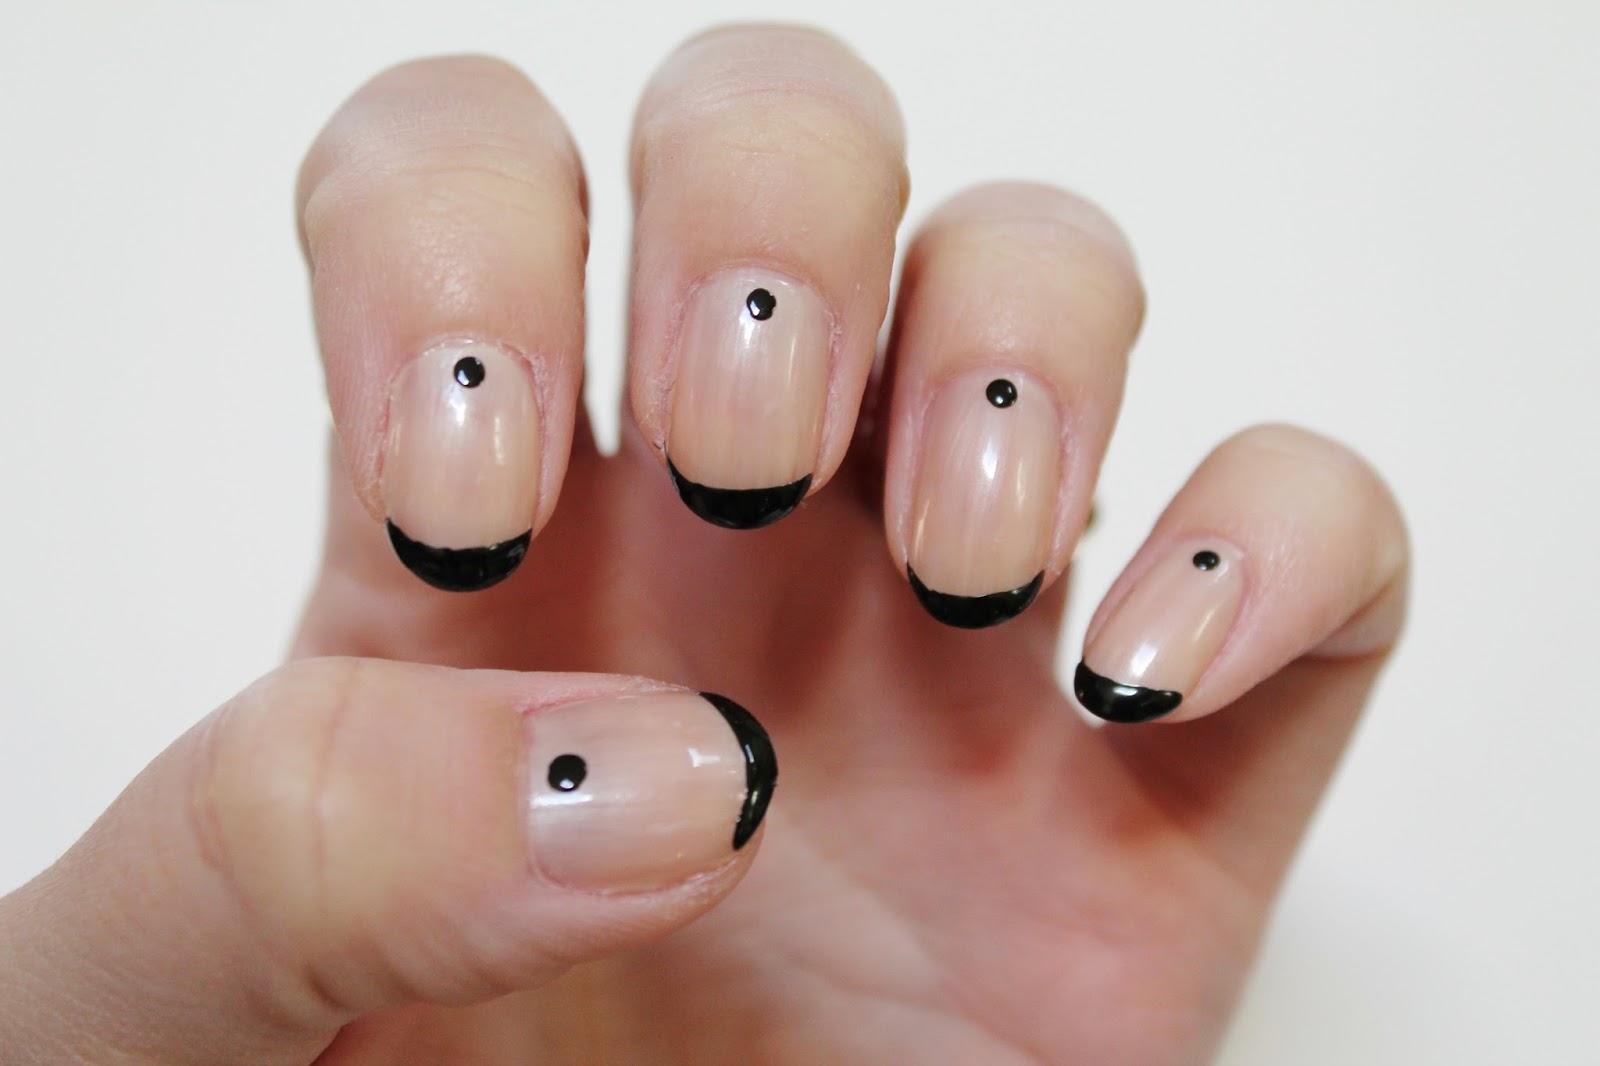 3. Top 10 Nail Art Designs for Beginners - wide 9